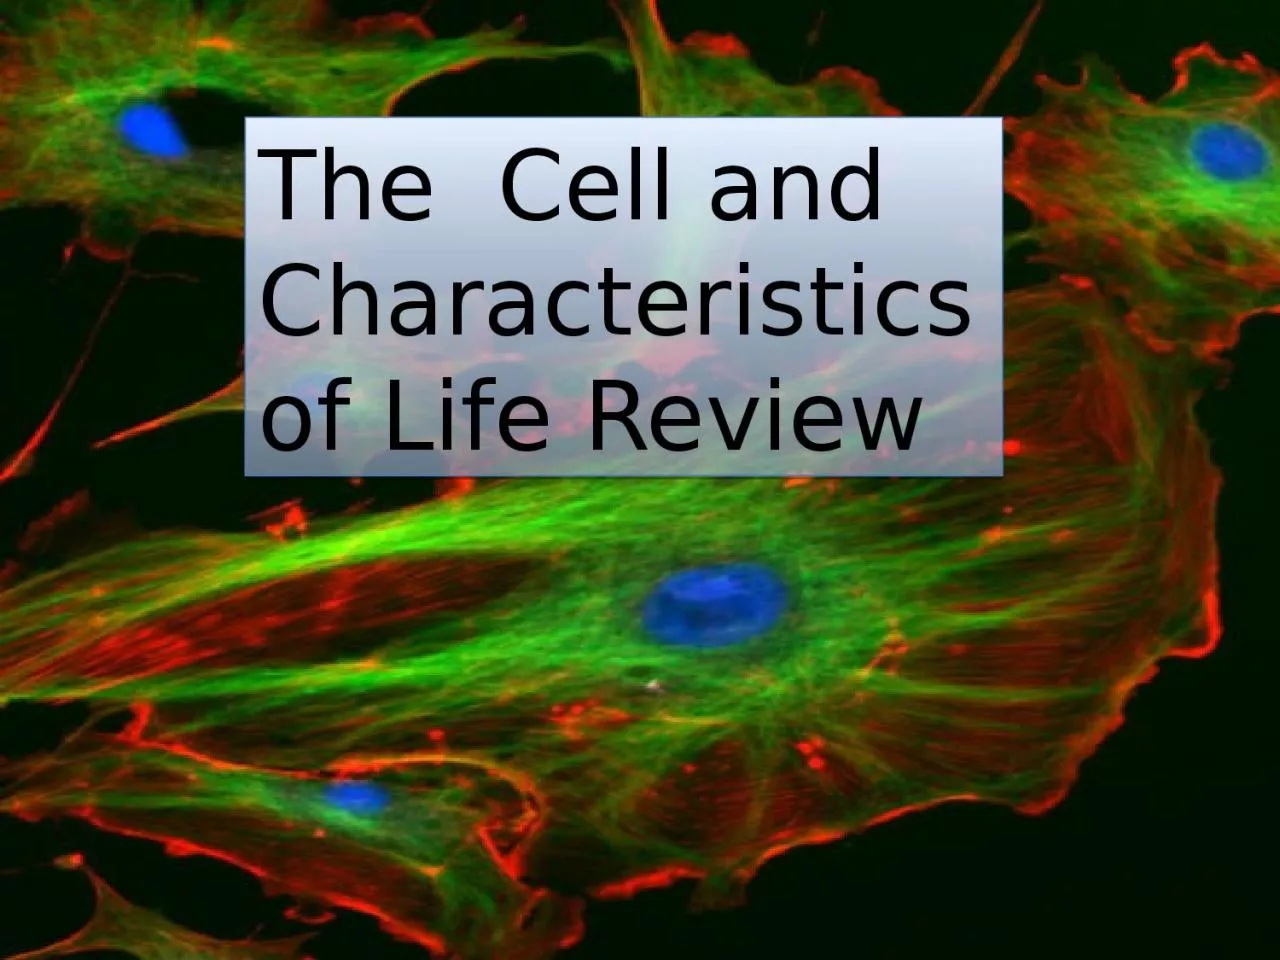 The  Cell and Characteristics of Life Review